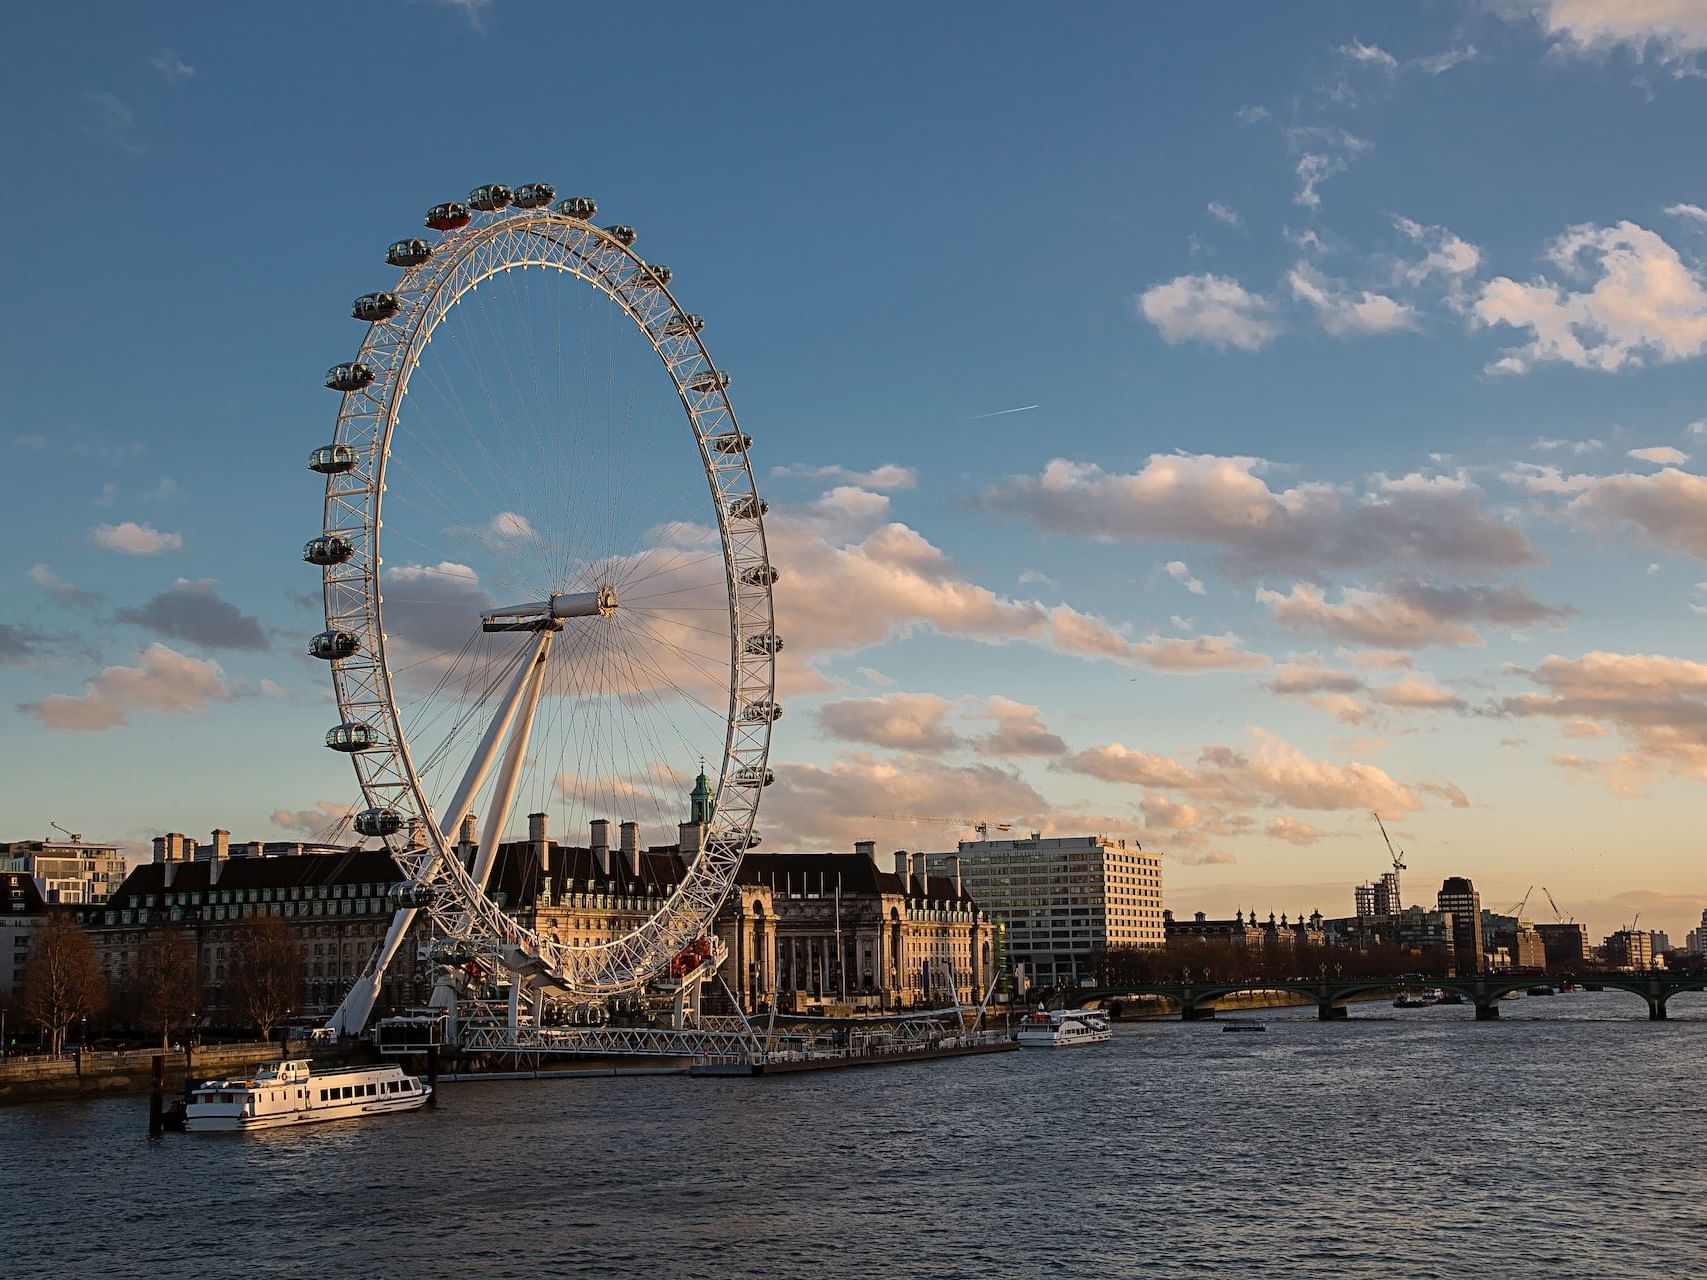 view of the London eye in Southbank London 